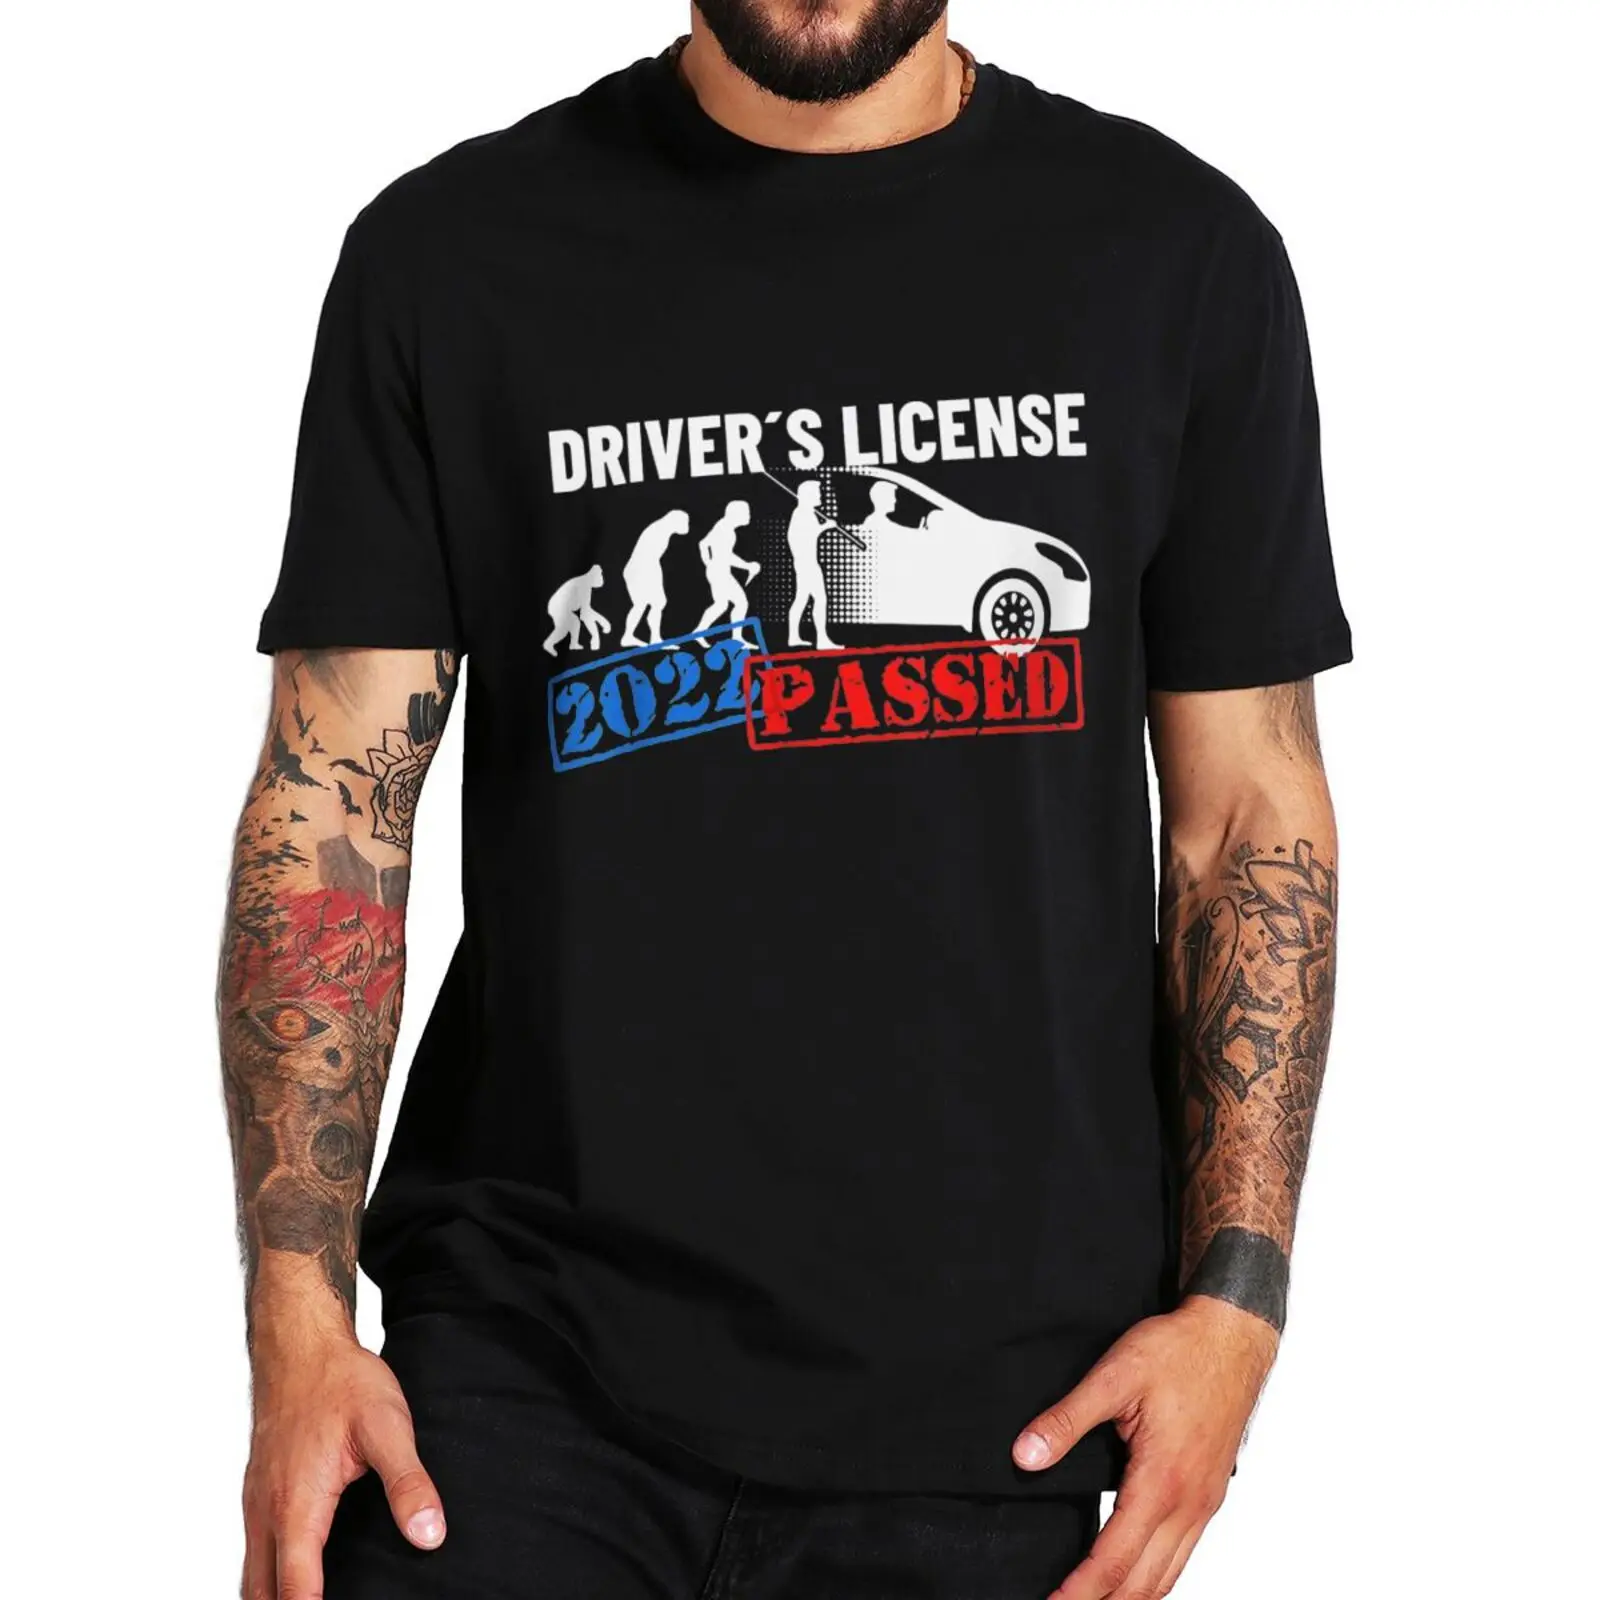 

Driver's License 2022 Passed T-Shirt Funny Driving Lovers Driver Gift Humor Tee Summe Cotton Unisex Casual Oversized T Shirt